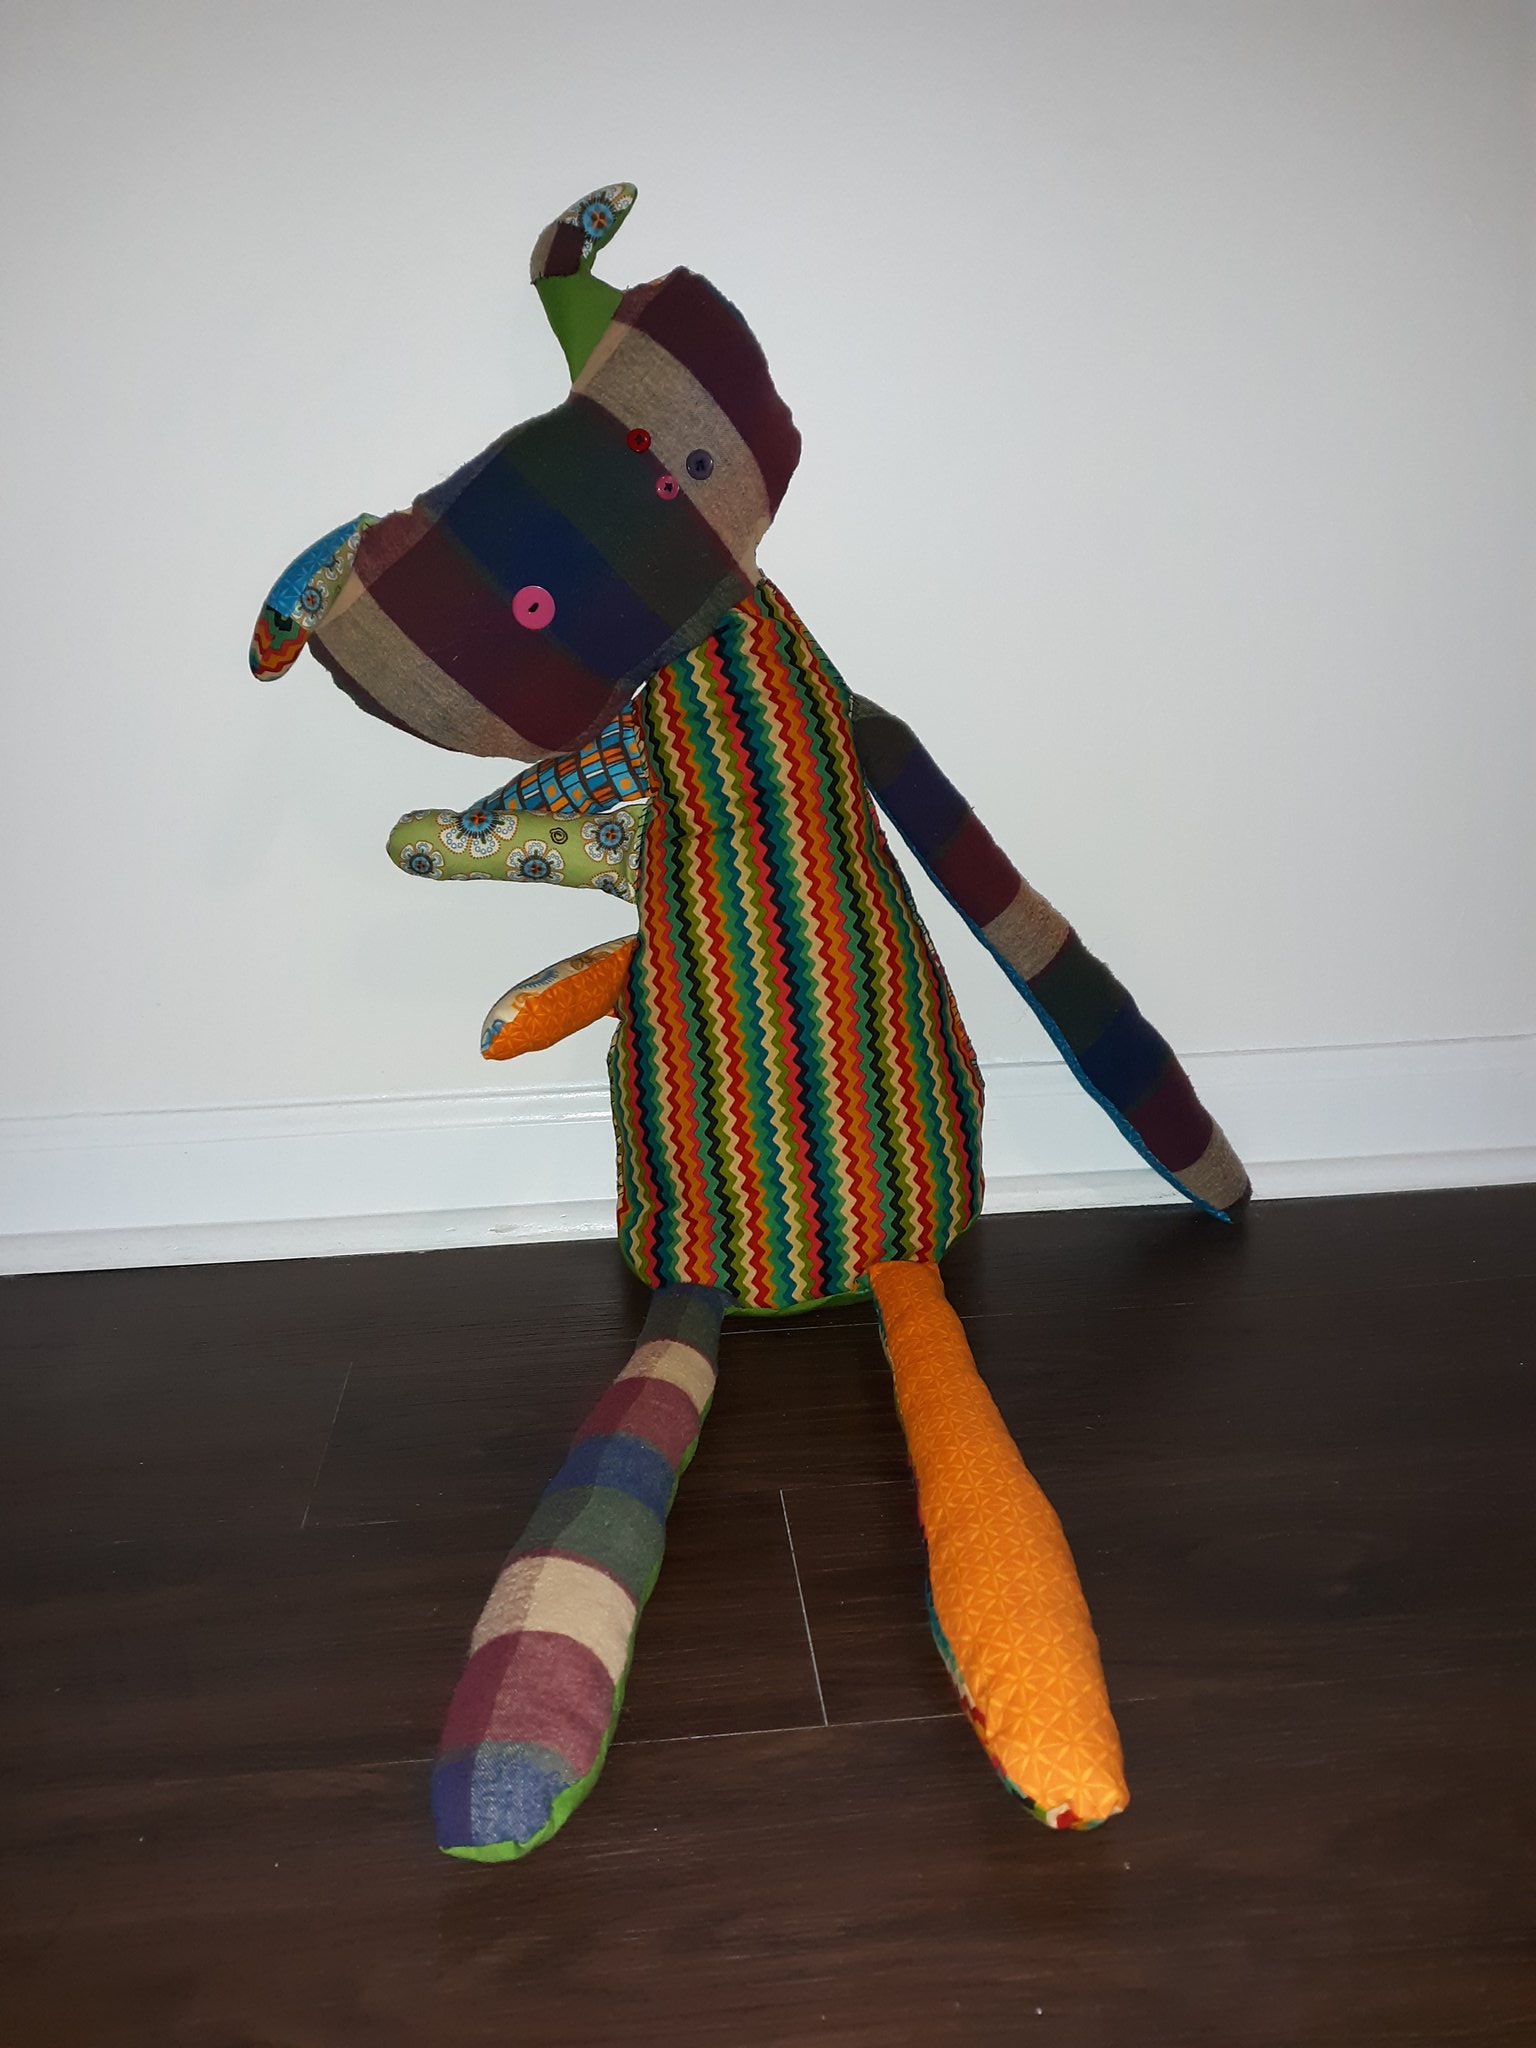 A very large doll sitting on the floor. She has a bean shaped head that is of a plaid pattern. She has two ears sticking out the top that are boomerang shaped and are much smaller than her head. She has one pink button on the left side of her head and three buttons on the right side of her head that are red, pink, and purple. Her body is very long and gets slightly wider as you reach the bottom. The front of her body is of a colorful chevron pattern. She has three short arms on the left side of her and one long arm on the right side of her. The three short arms each have a different pattern on them with the top one having a square pattern of browns, blues, and oranges, the middle arm having a green fabric with blue flowers, and the bottom arm being orange. The arm on the right side is of the same plaid fabric as her head. She has two long legs. The leg on the left is plaid and the leg on the right is orange.